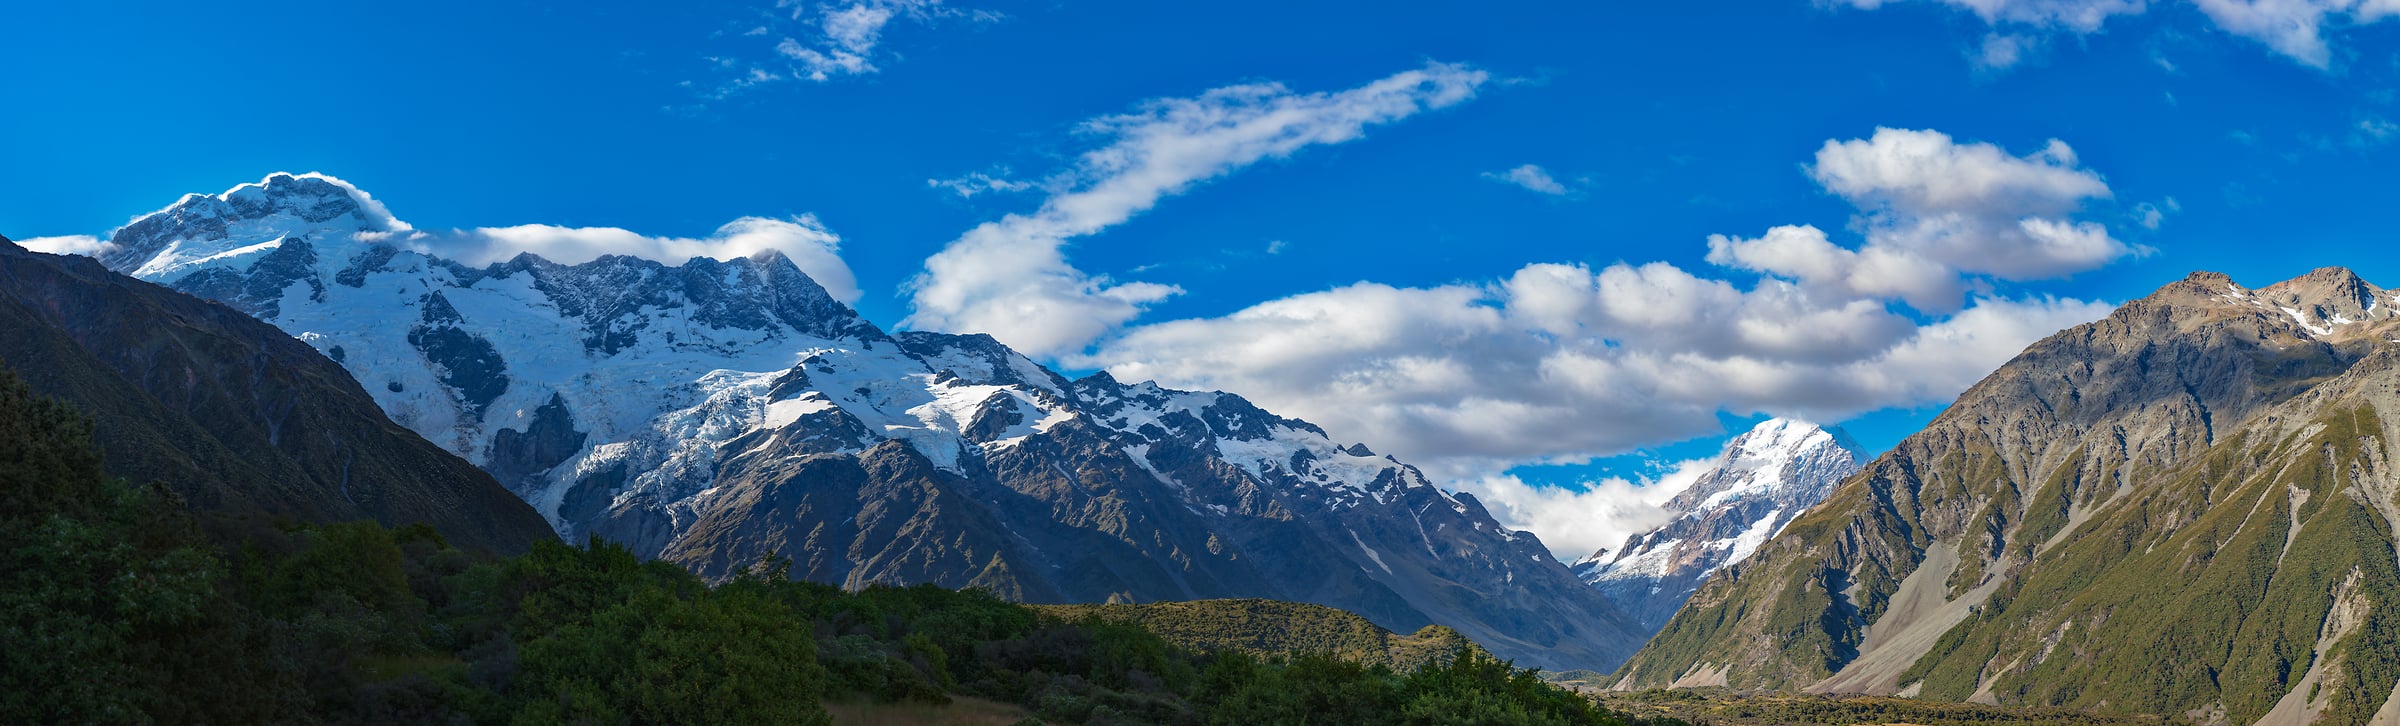 1,483 megapixels! A very high resolution, large-format VAST photo print of Aoraki, Mount Cook; landscape photograph created by John Freeman in Mount Cook National Park, New Zealand